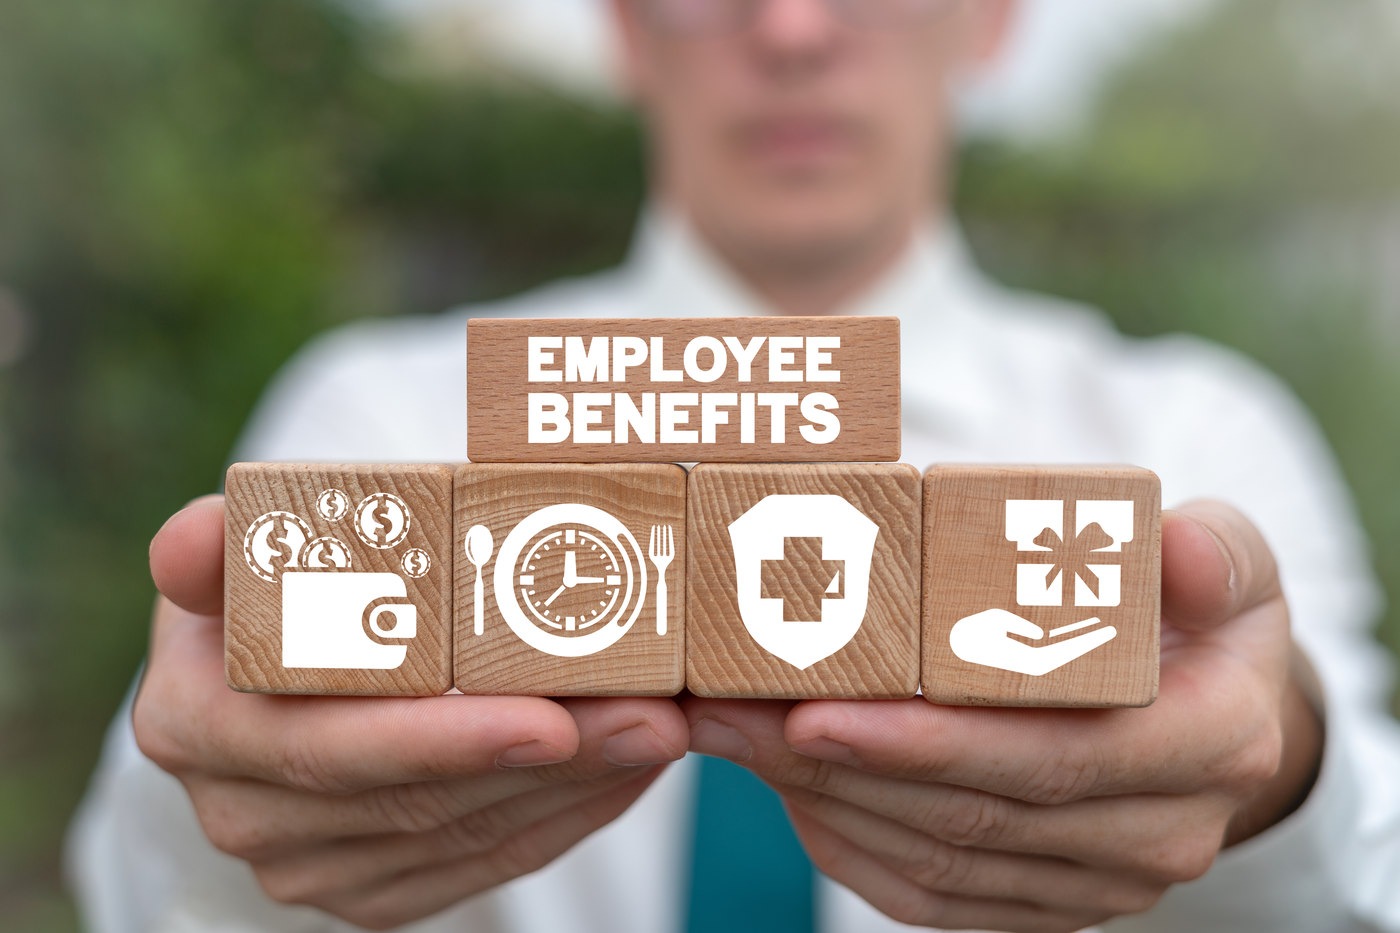 Employee Benefits Products - New Mexico Employee Benefits Services